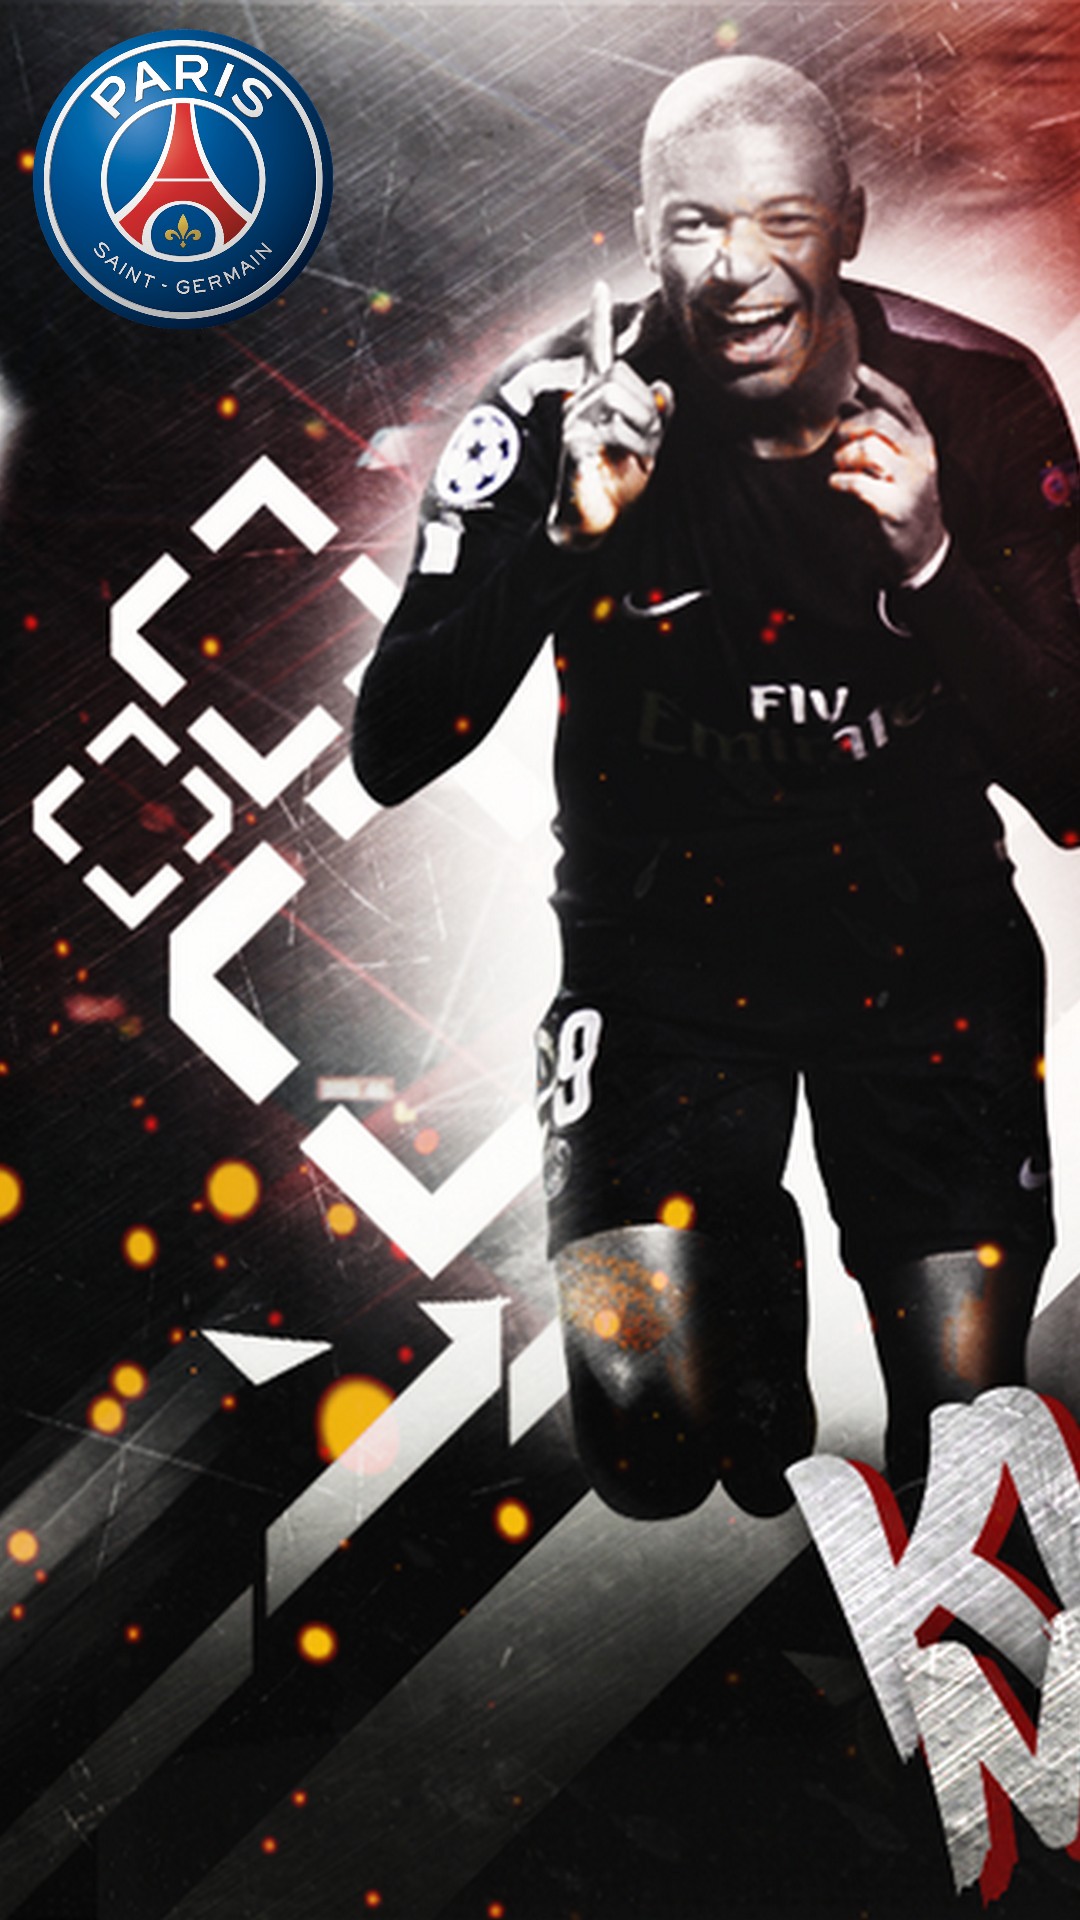 PSG Kylian Mbappe Wallpaper iPhone HD With Resolution 1080X1920 pixel. You can make this wallpaper for your Mac or Windows Desktop Background, iPhone, Android or Tablet and another Smartphone device for free